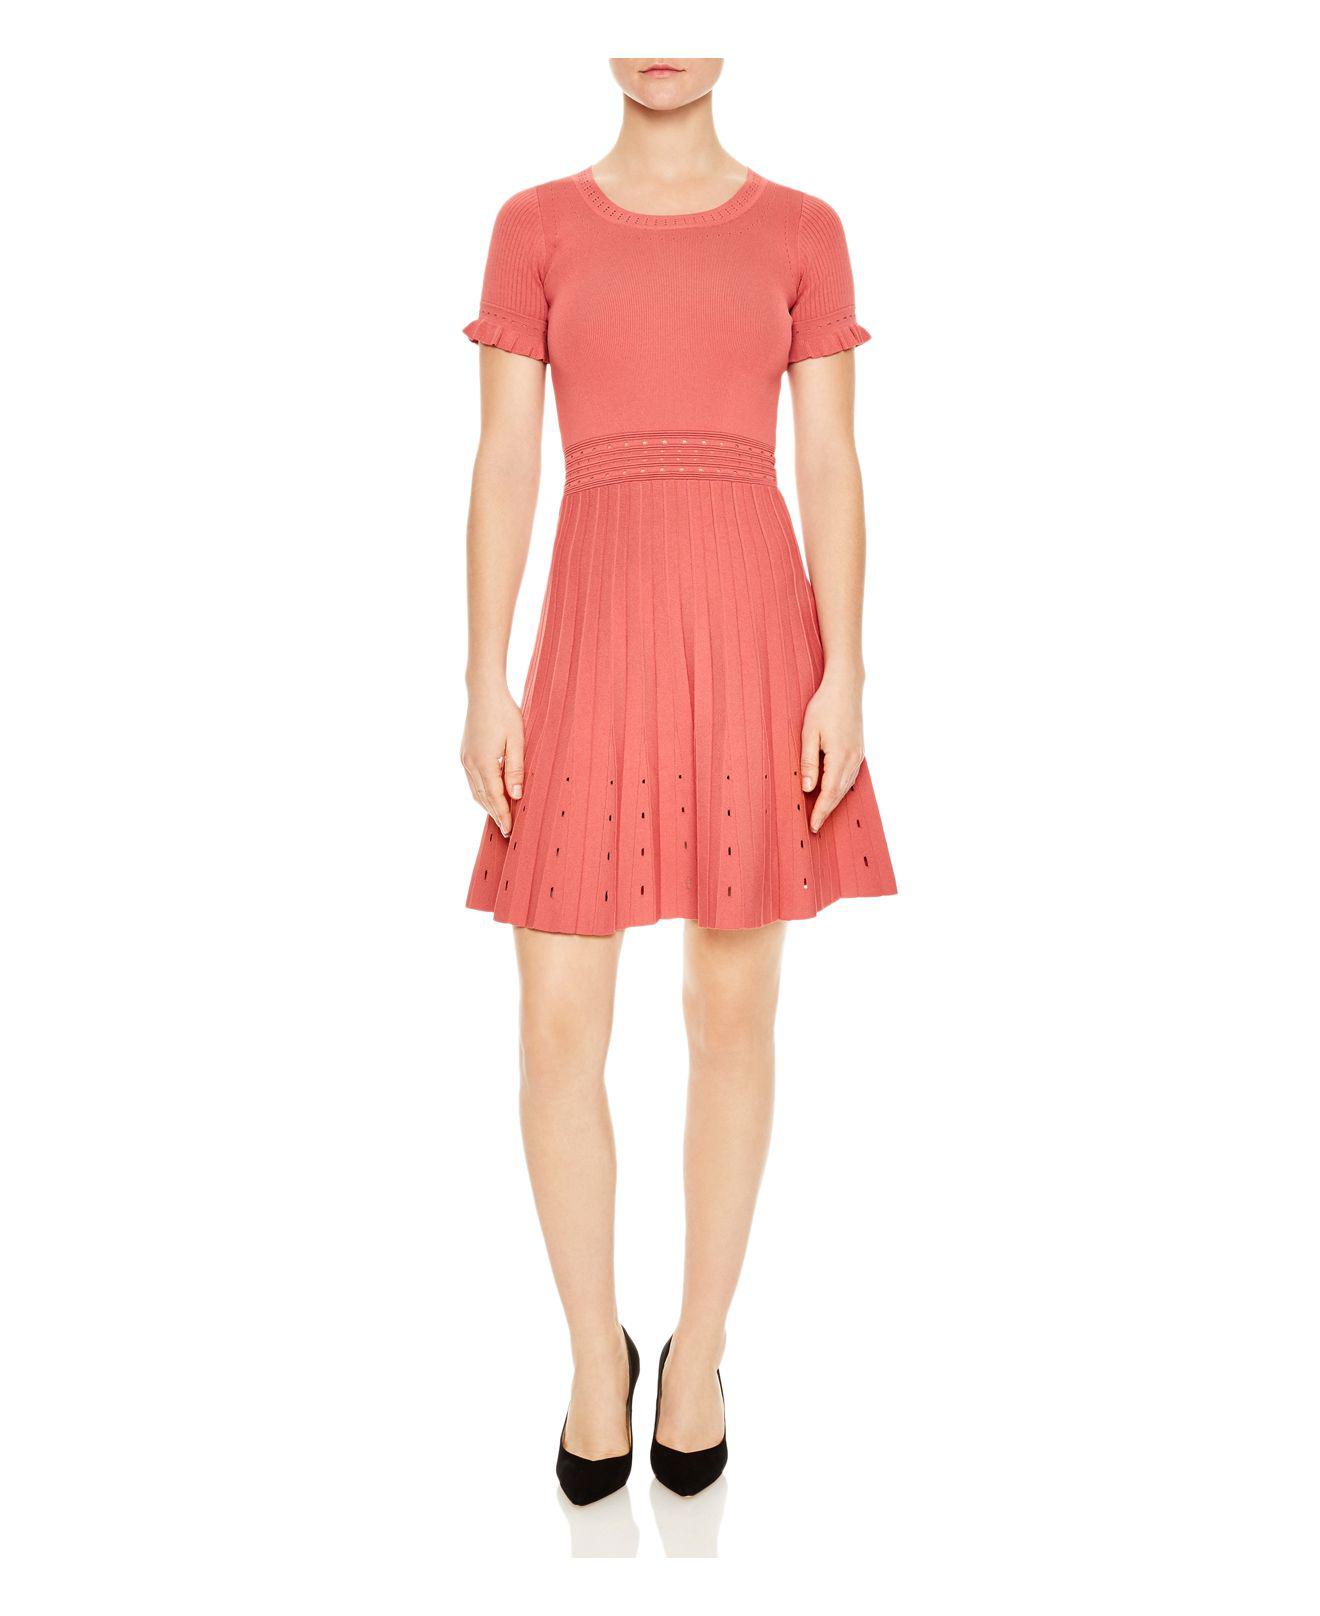 Lyst - Sandro Etor Eyelet-detail Pleated Knit Dress in Pink - Save 26%